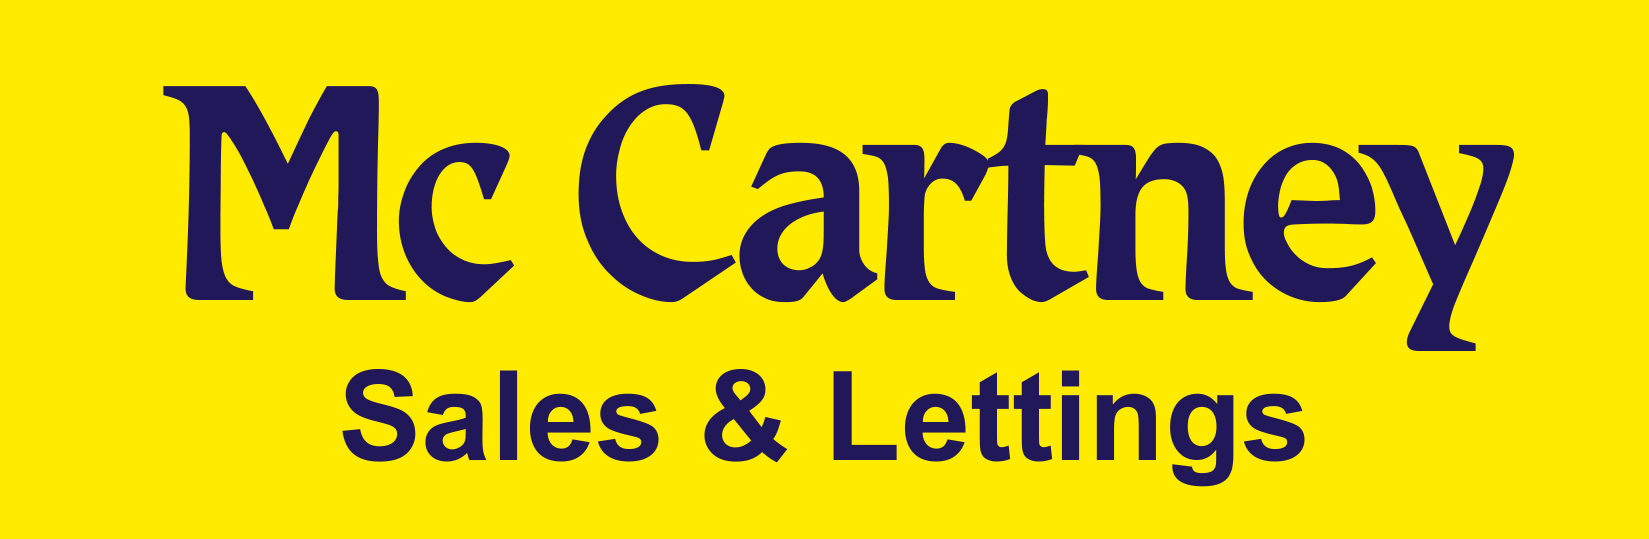 McCartney Sales & Lettings Agents